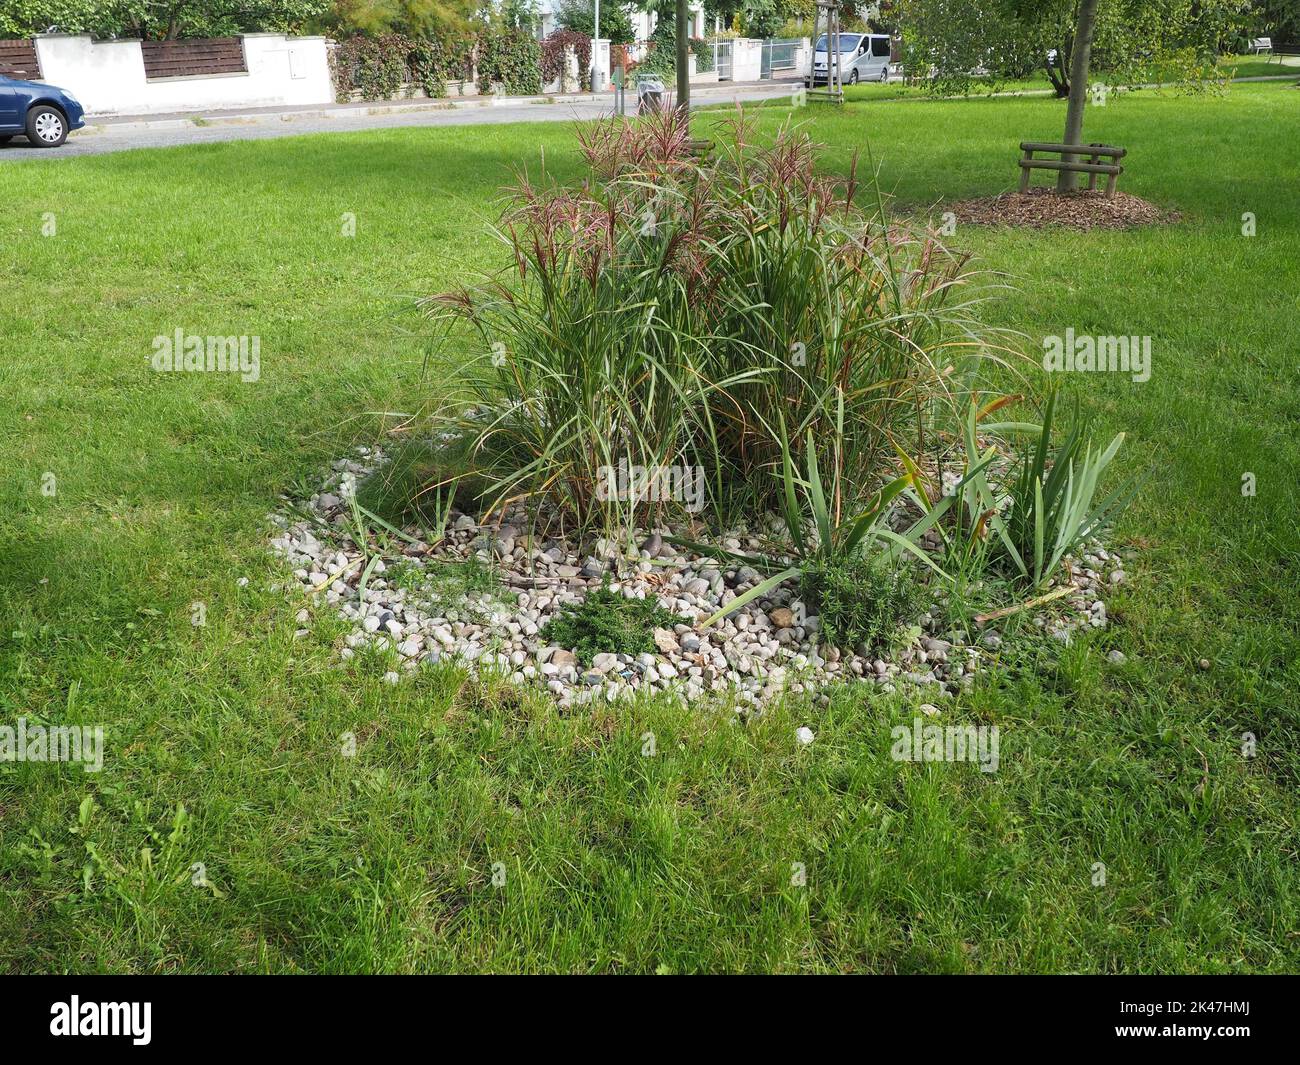 Bush of ornamental grass in a public park with a large and a small, newly planted tree in the background Stock Photo